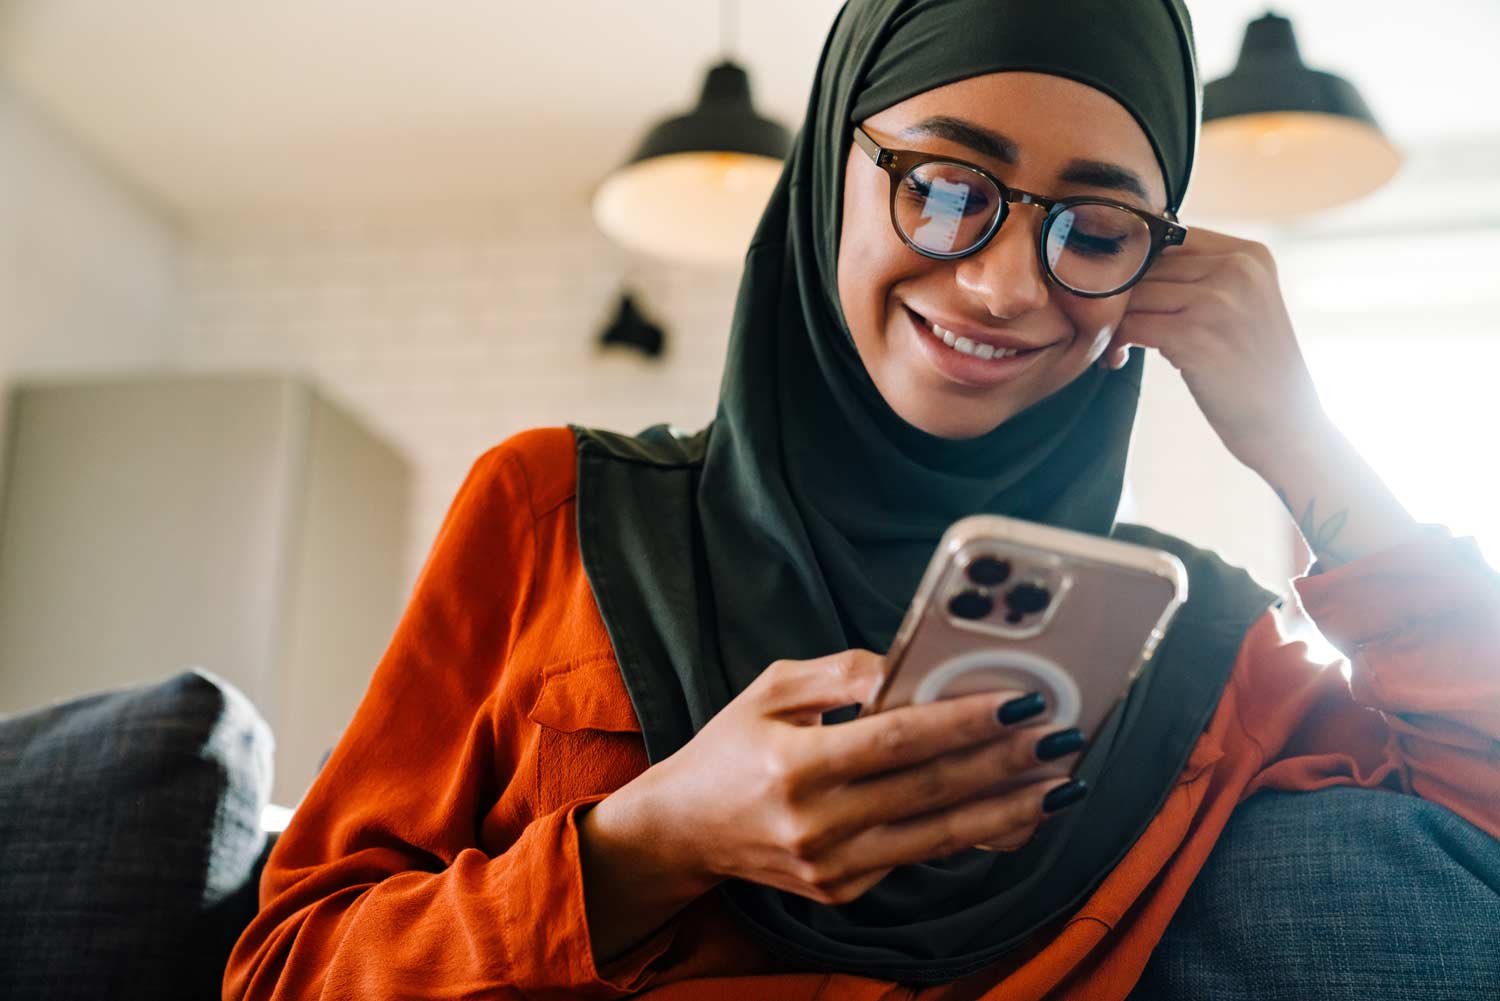 A smiling woman in glasses and a green hijab looks at her smartphone in a cozy, modern home